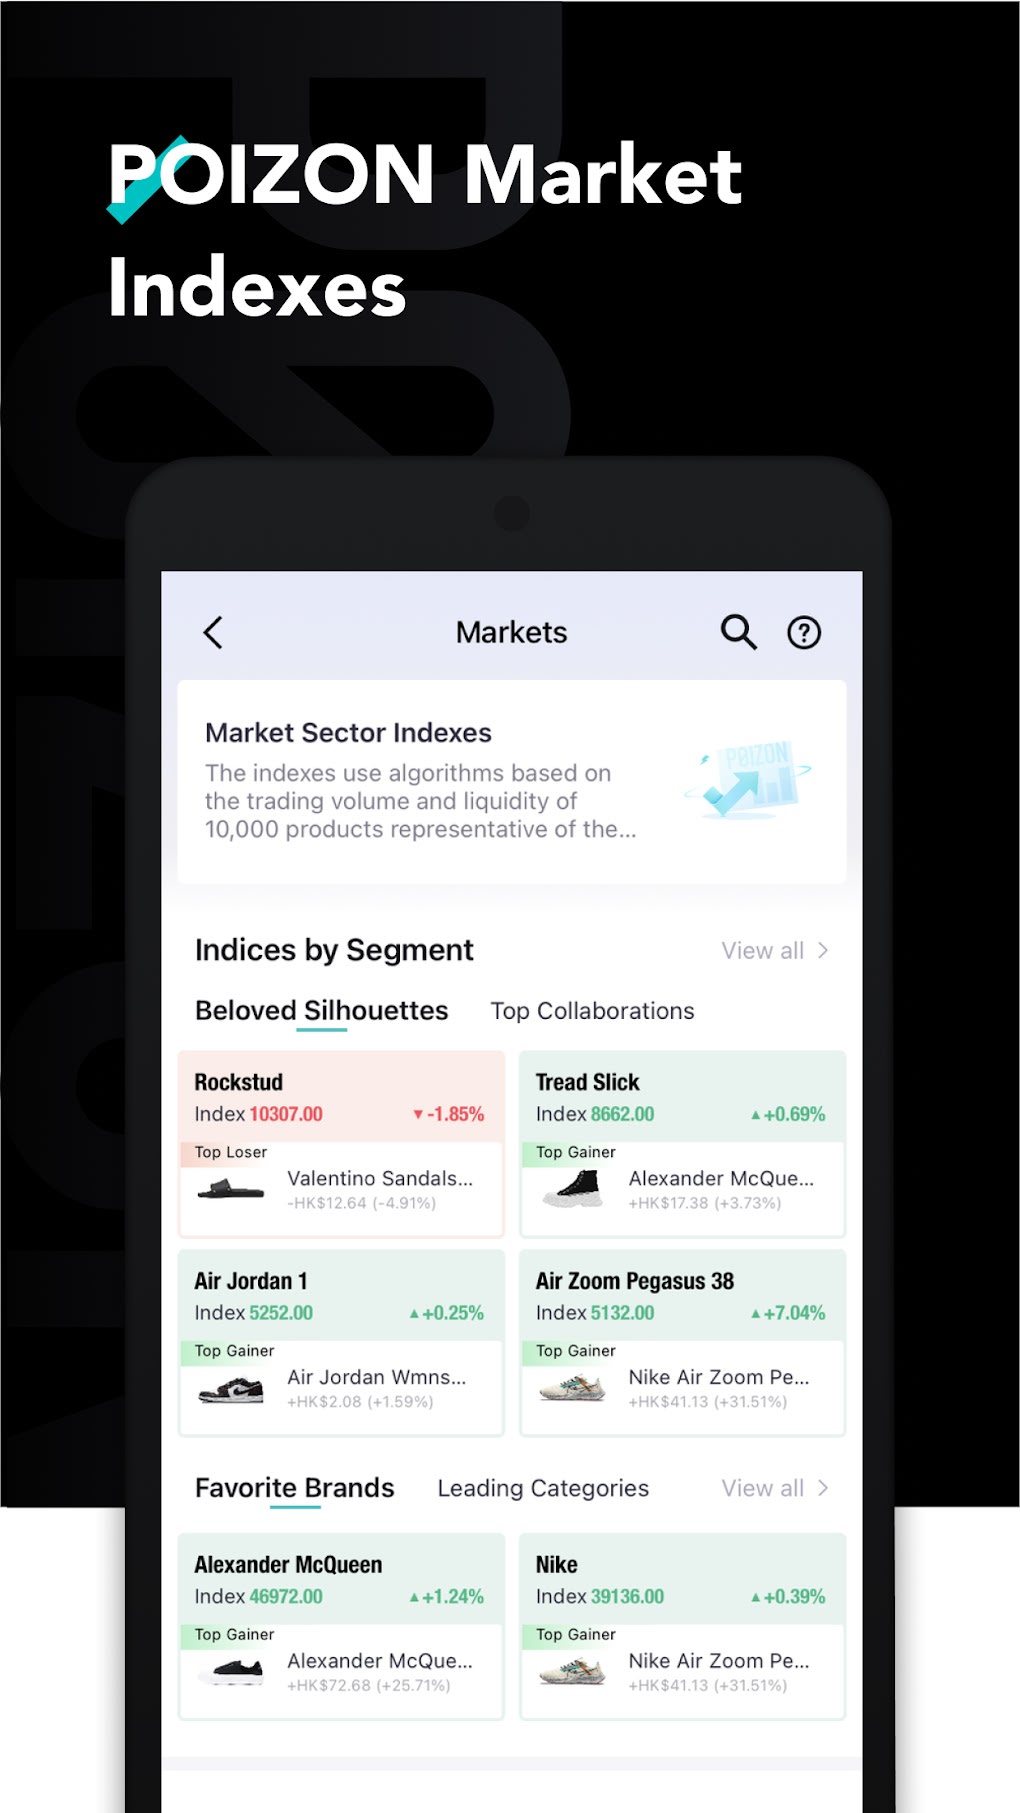 App of the month - Dewu (Poizon) | Latest China News from China Trading Desk